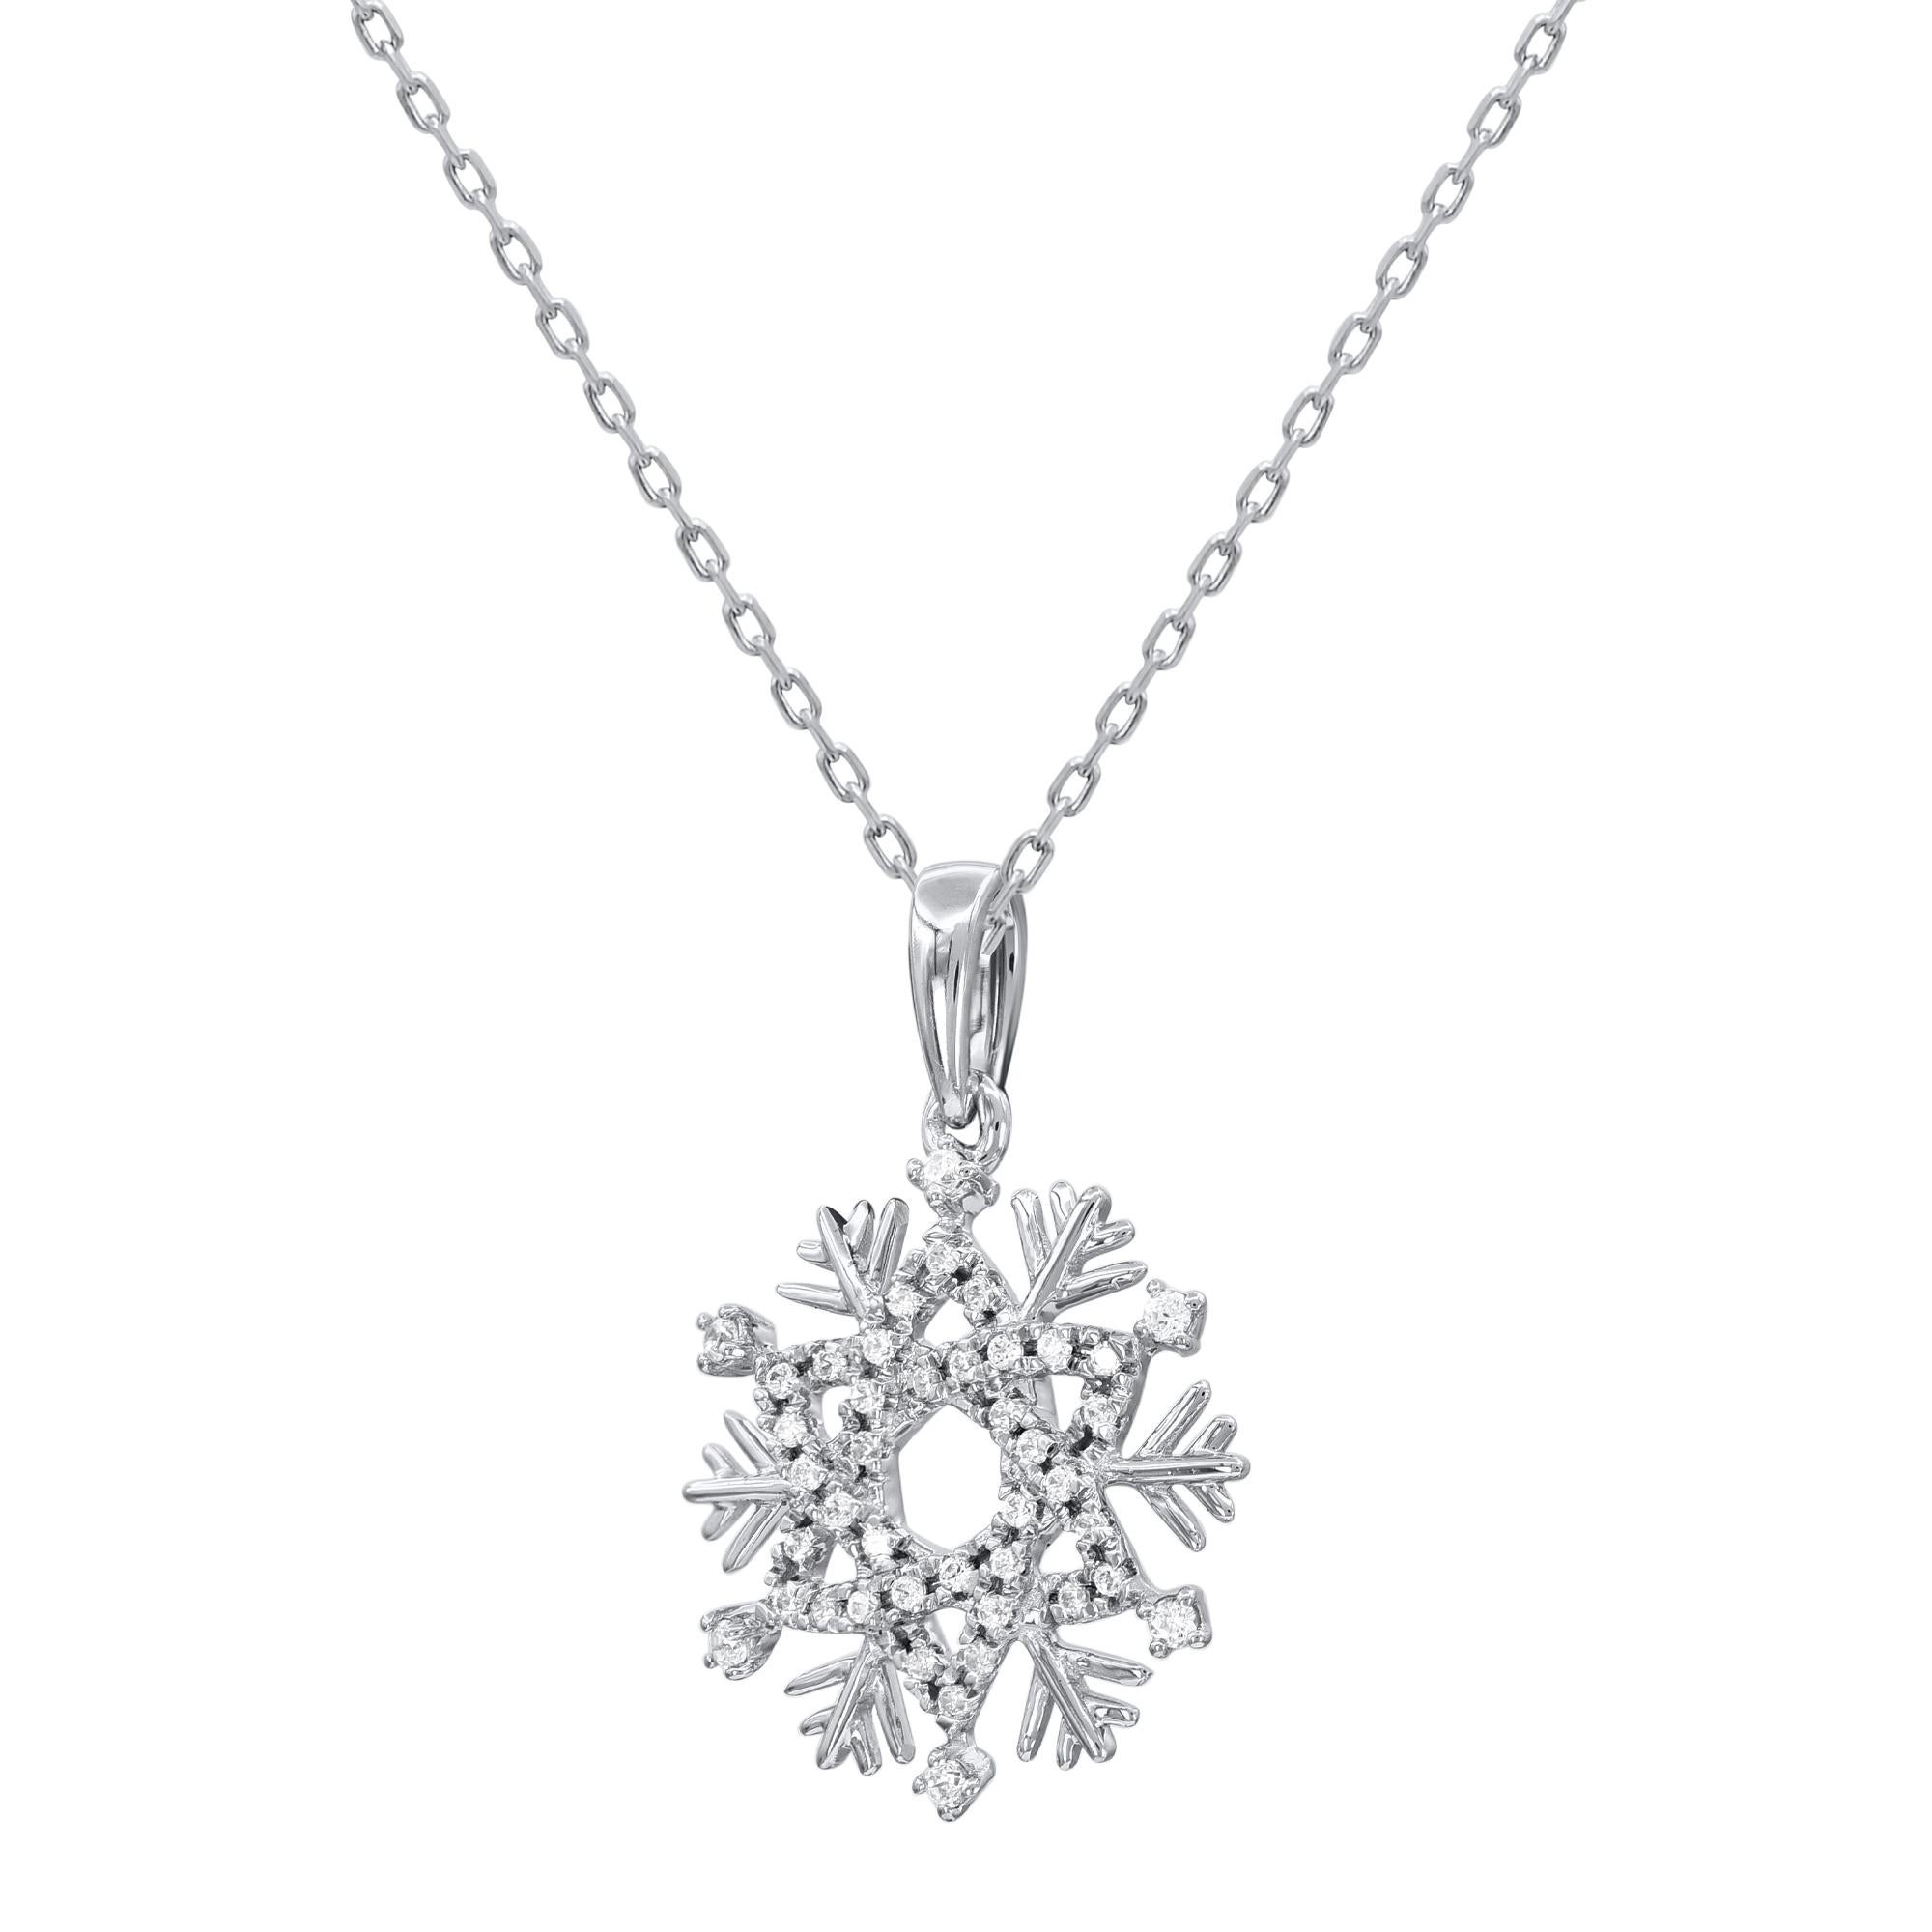 This snowflake diamond pendant fits any occasion with ease. These pendants are studded with 42 Single cut natural diamonds in prongs setting in 14 karat white gold. Diamonds are graded as H-I color and I-2 clarity. Pendant suspends along a cable